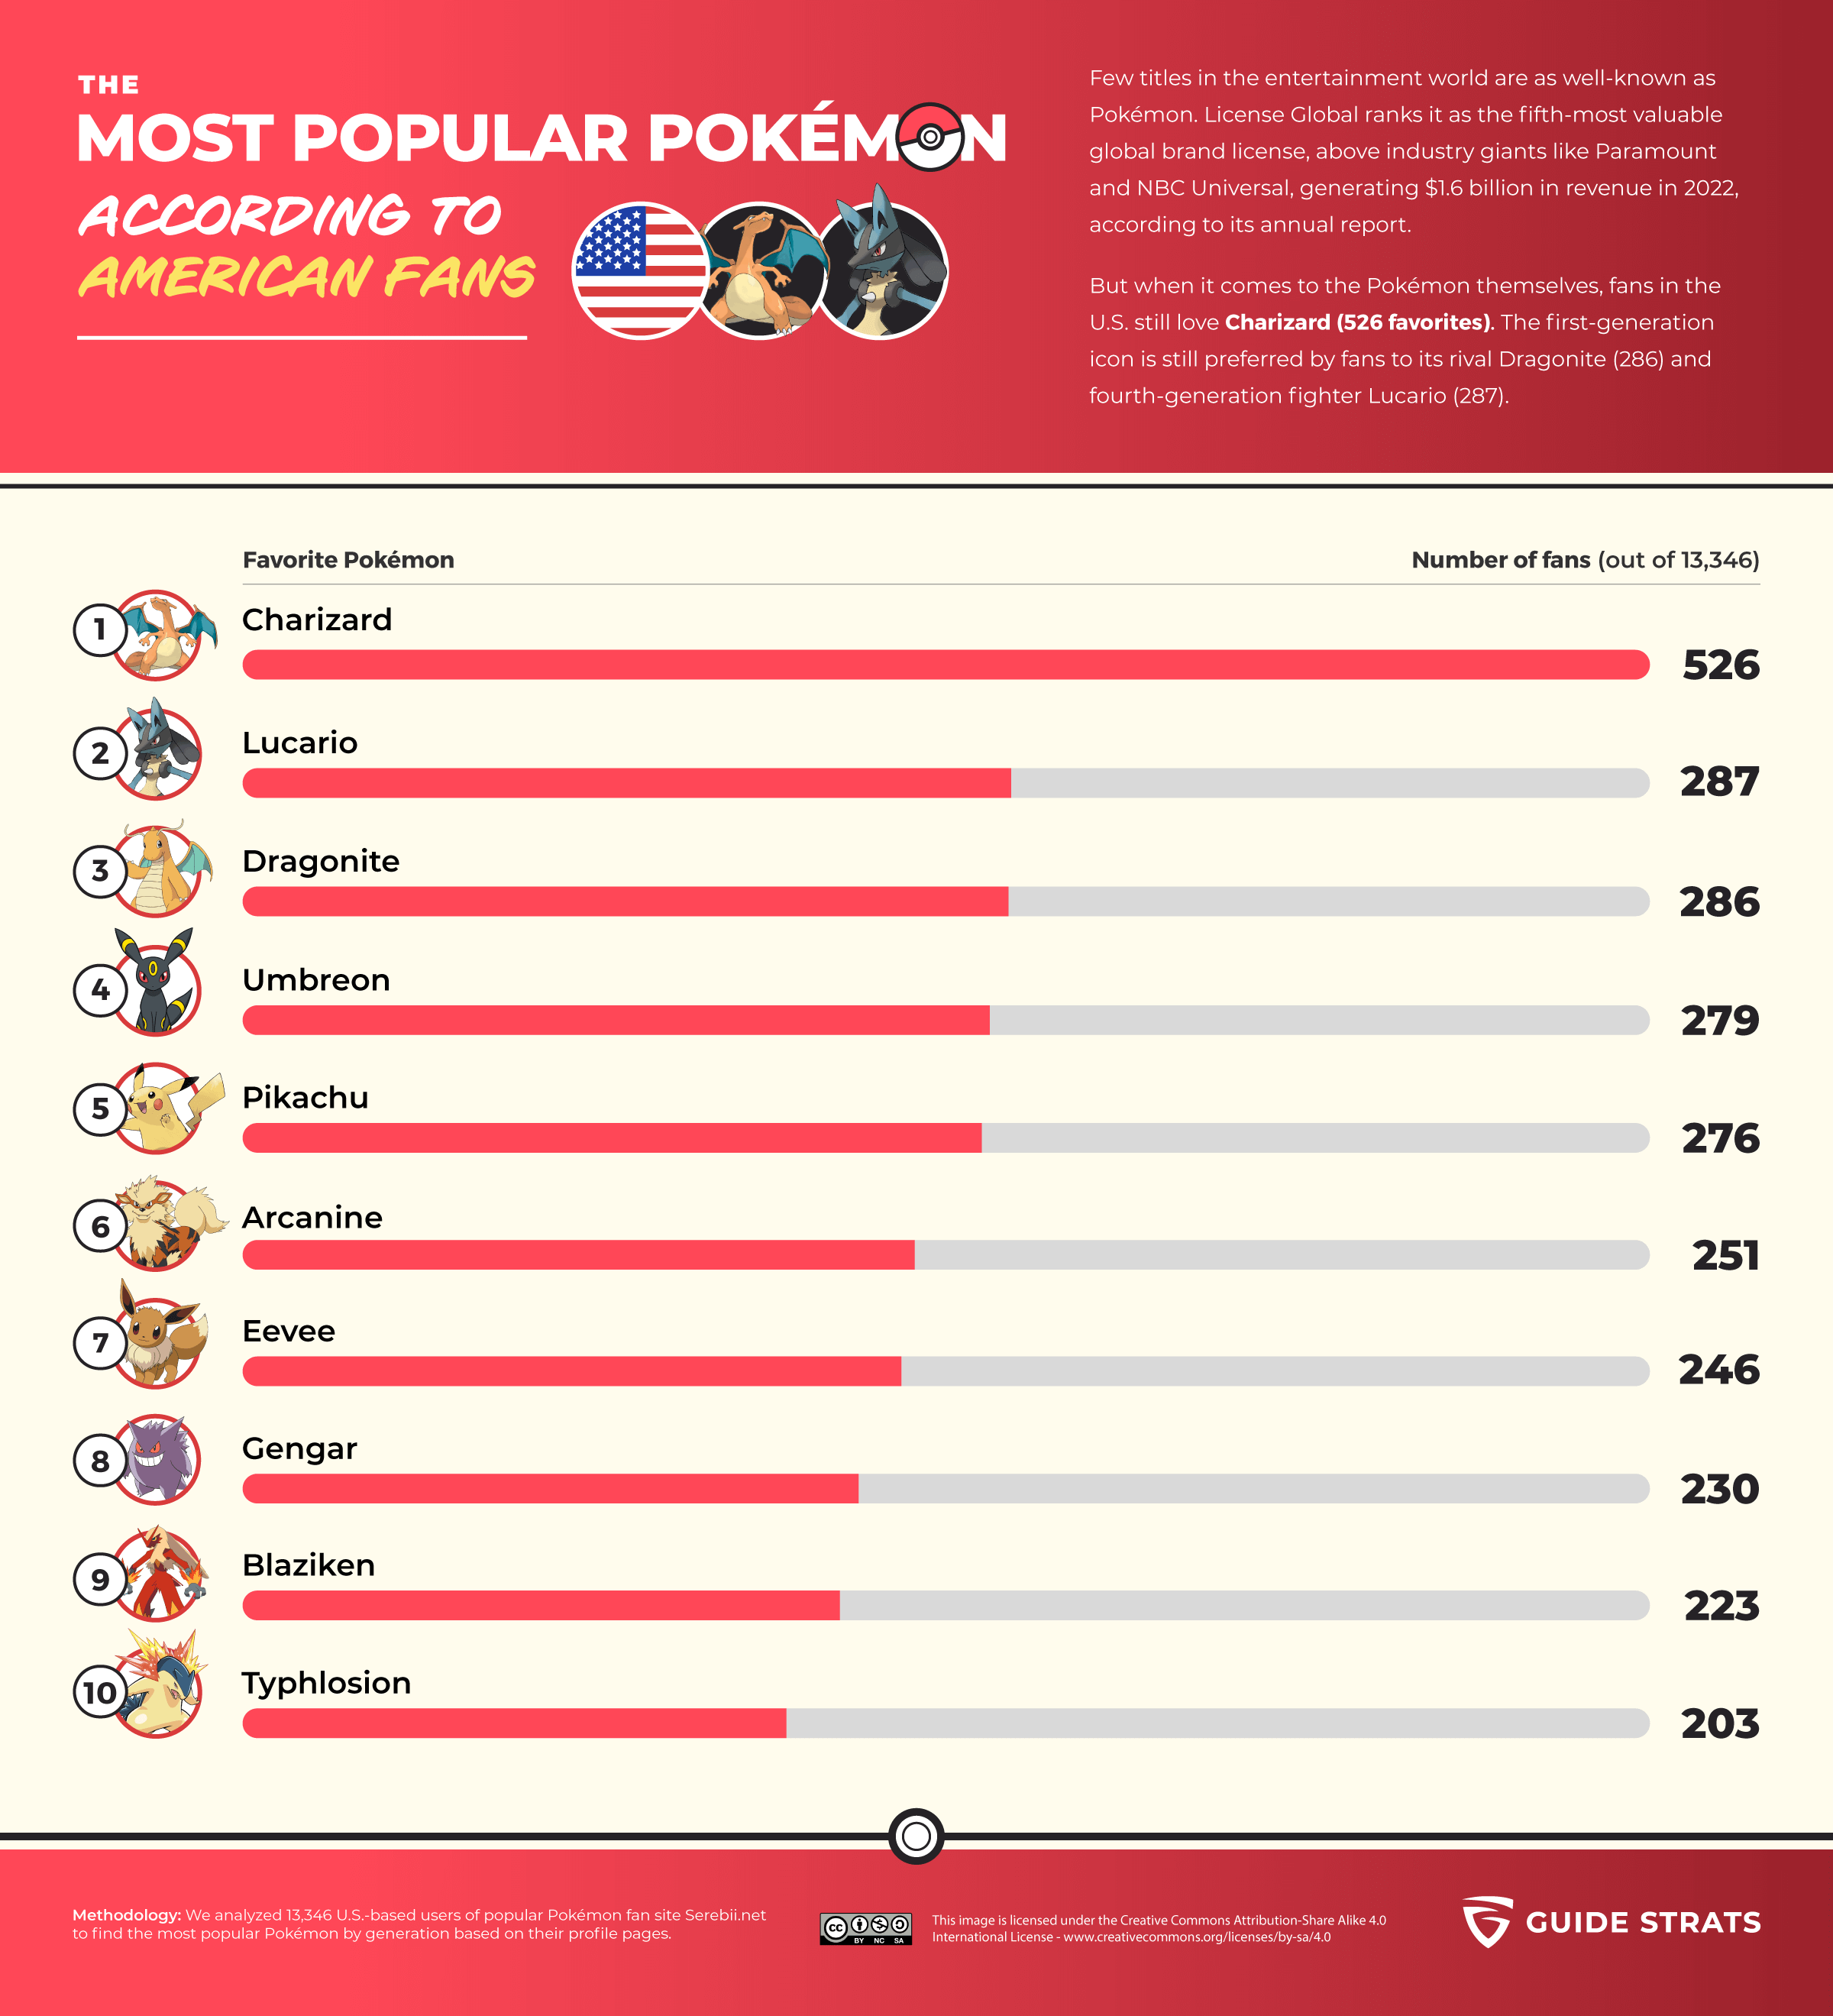 The most popular Pokemon, according to American fans